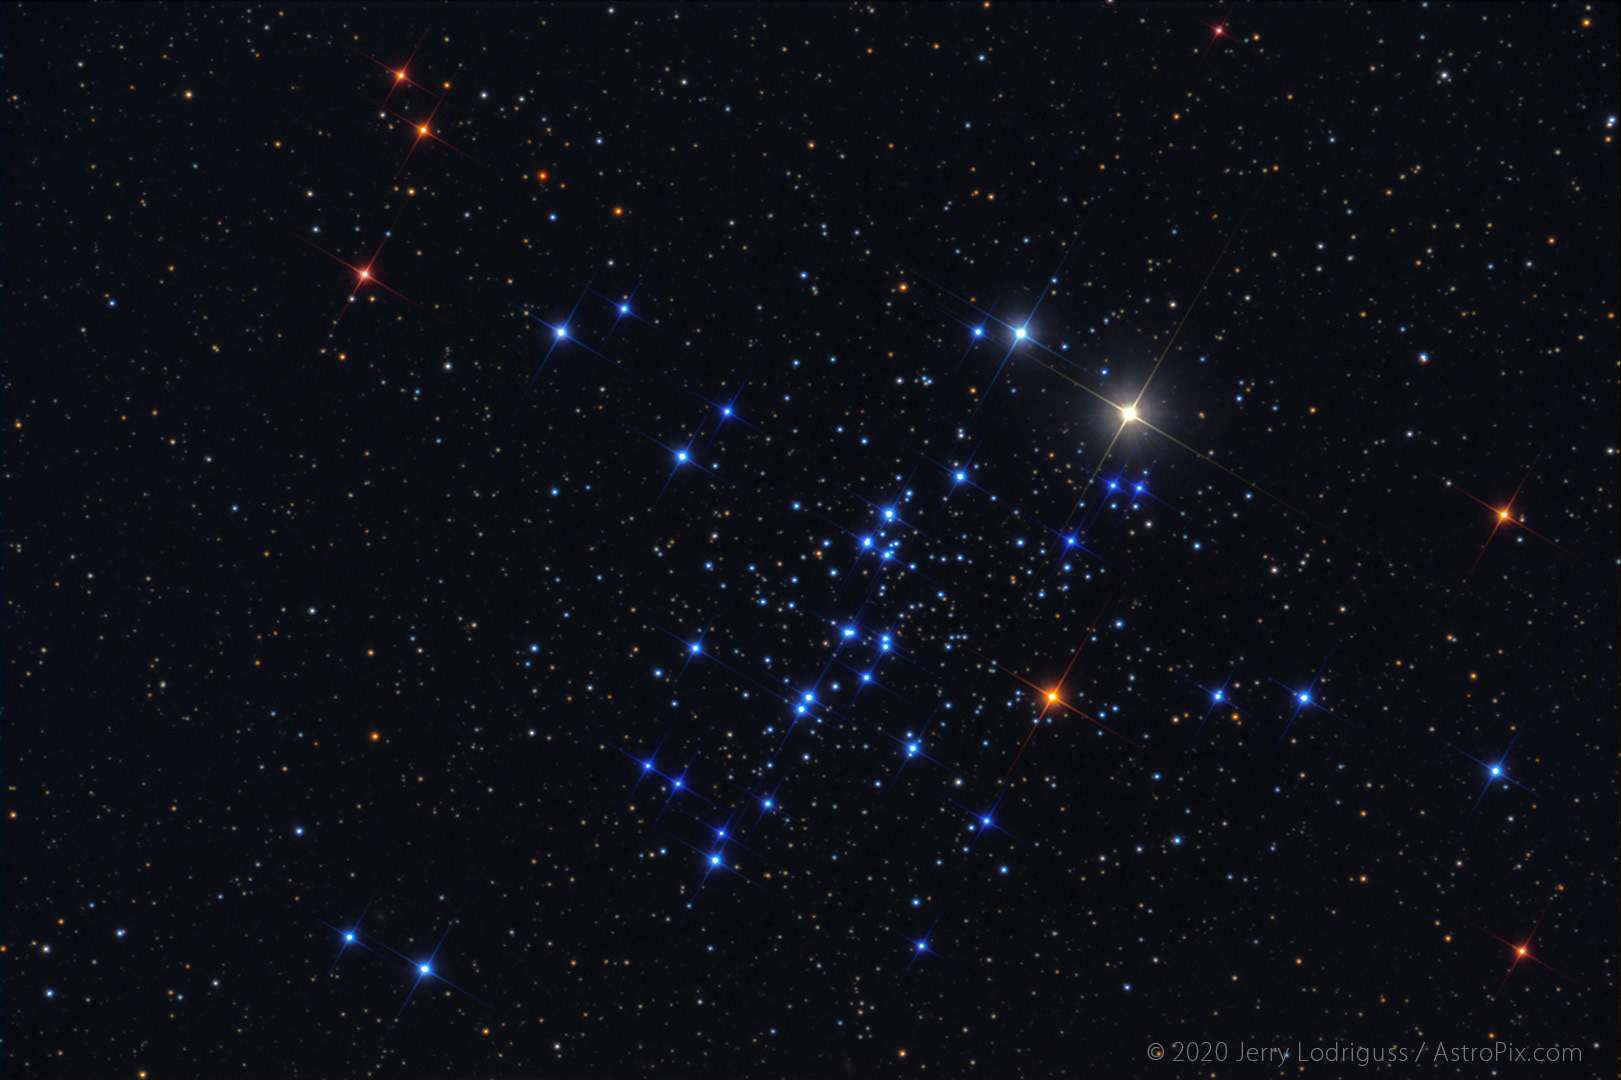 NGC 457, The Owl Cluster in Cassiopeia.